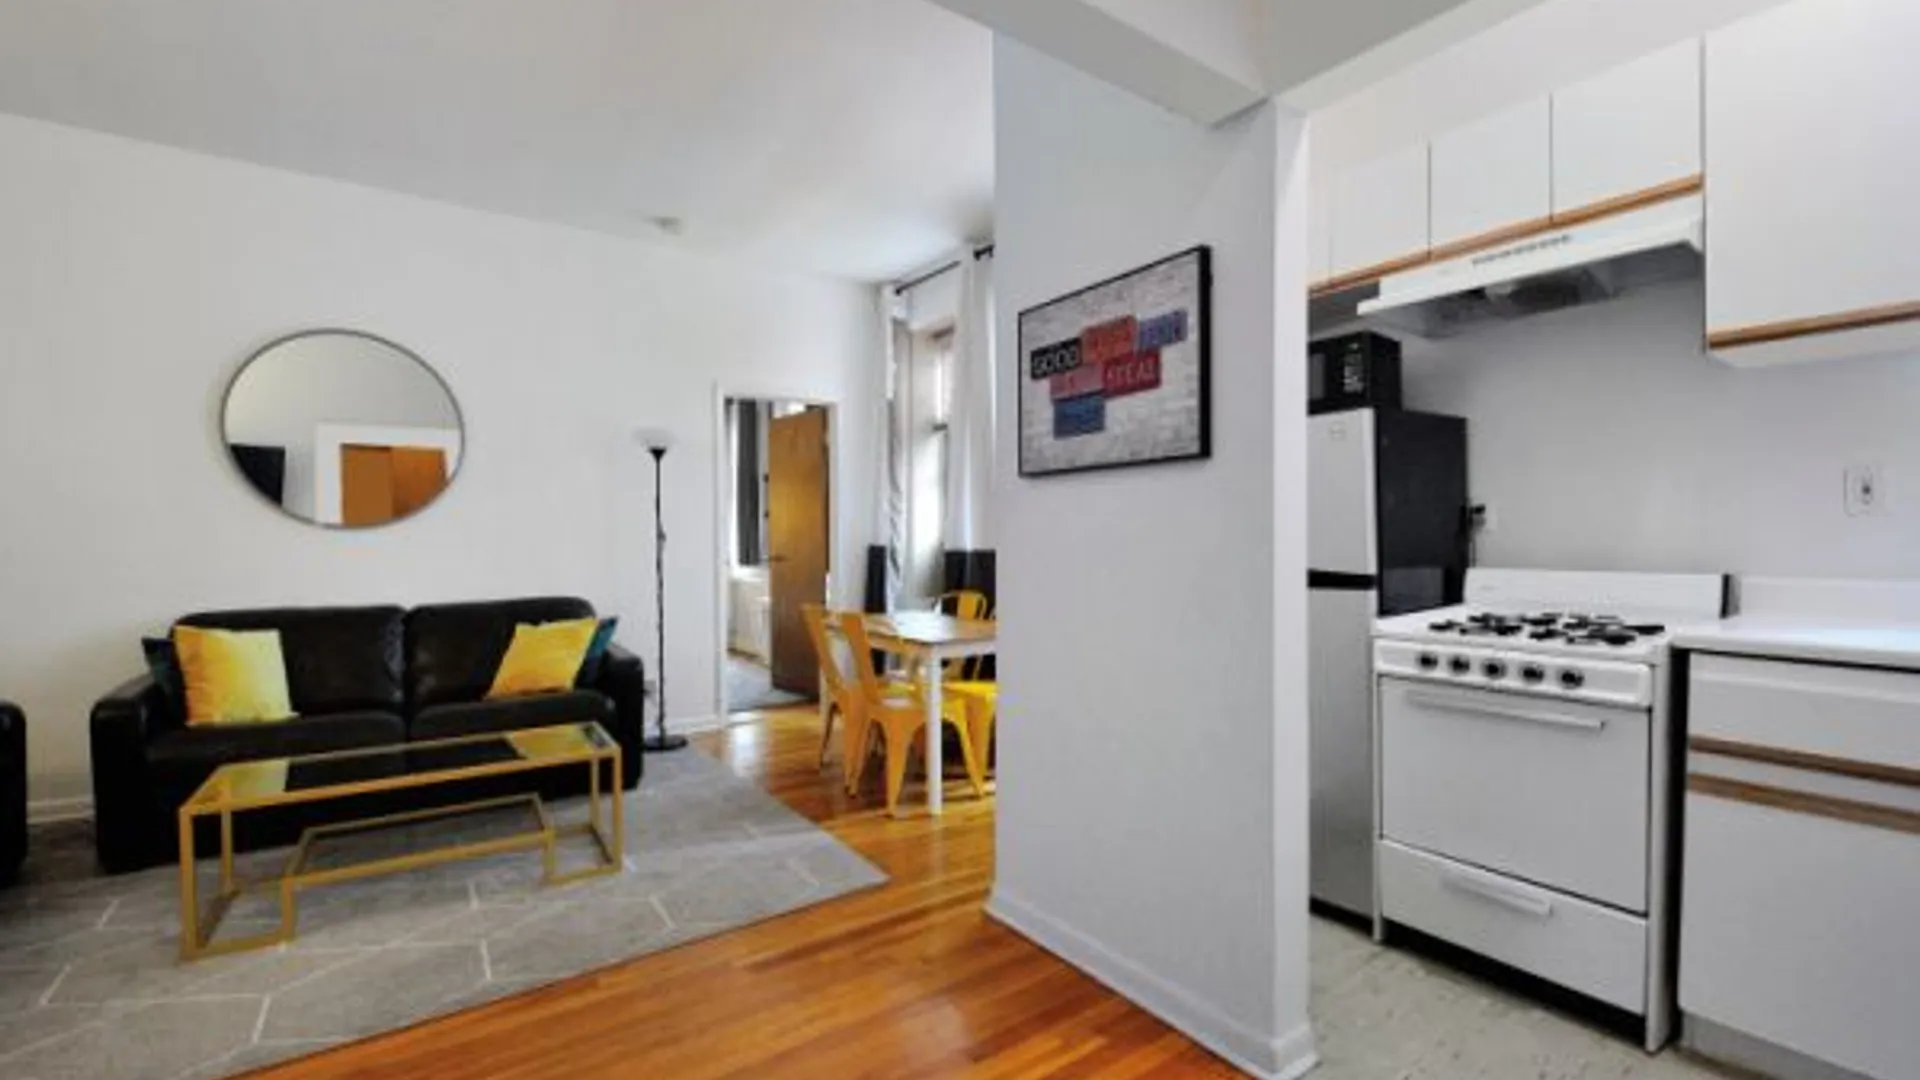 Lee 89 Spa, 201 East 89th Street, New York, NY 10128, USA | 1 bed apartment for rent